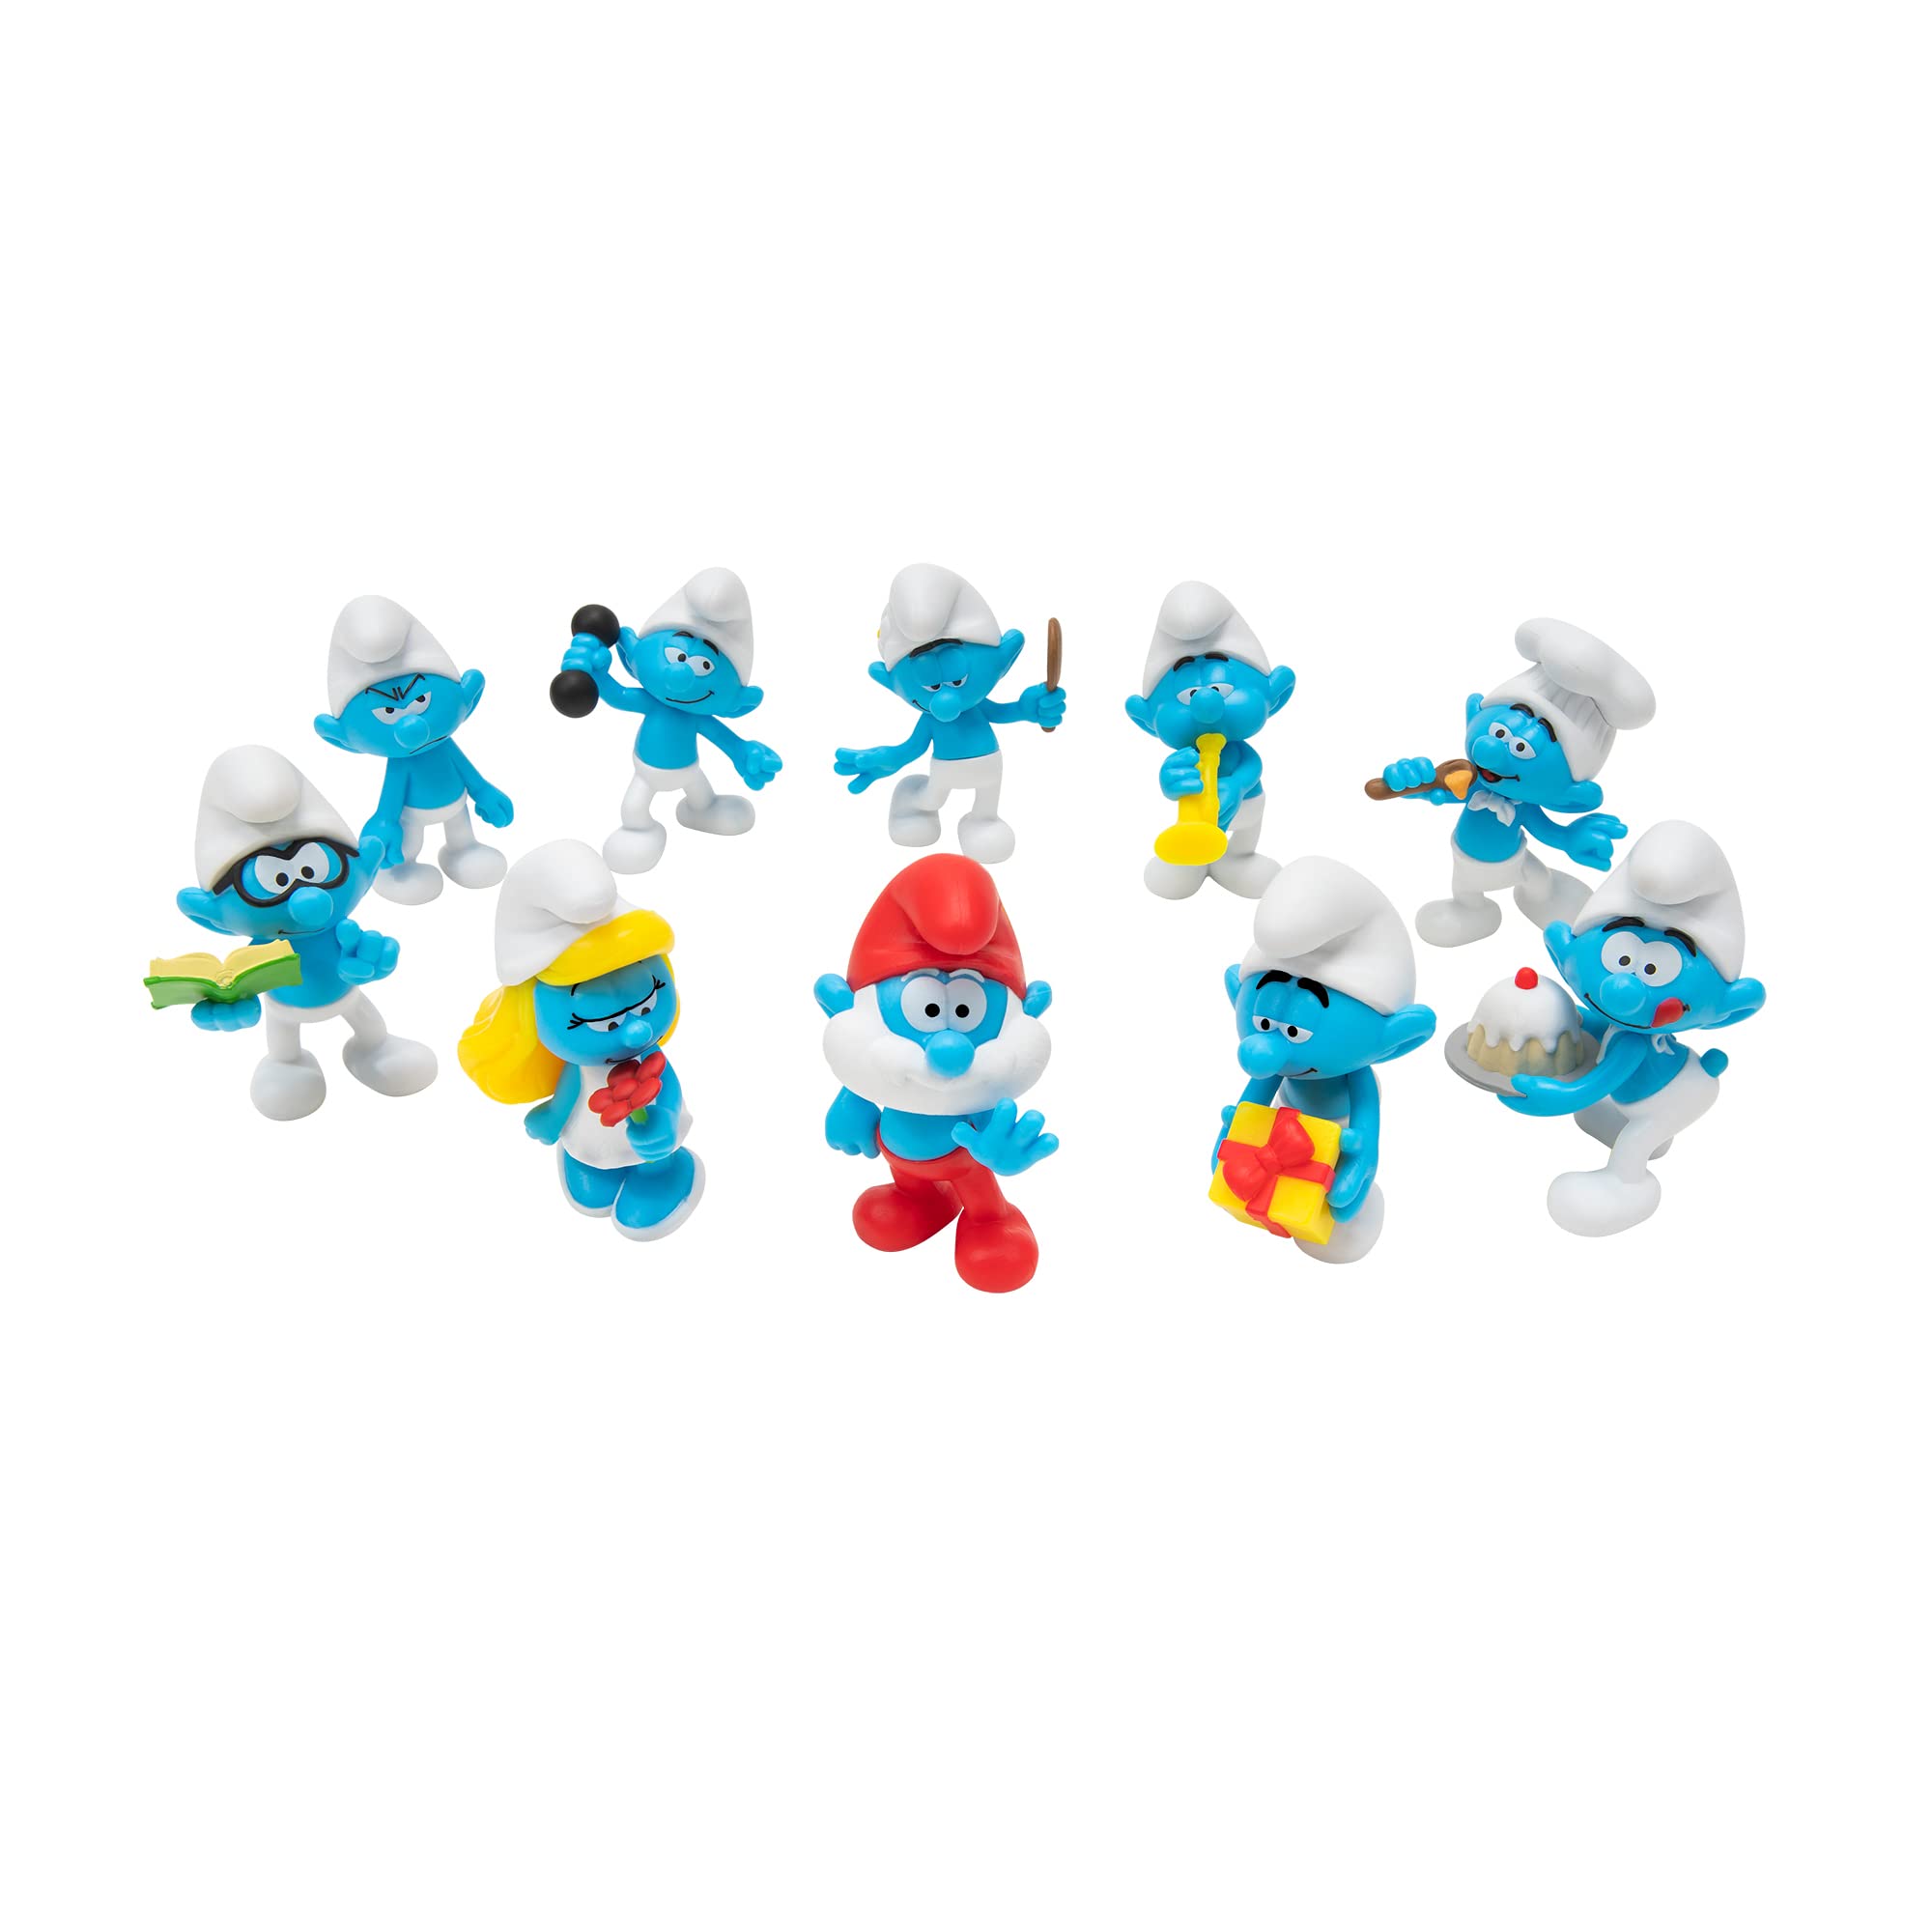 The Smurfs 40TH Anniversary Classic Figure 10 Pack - Features 2-Inch Smurfette, Grouchy, Greedy, Papa Smurf, Brainy, Hefty, Vanity, Harmony, Jokey, Chef - Authentic Details